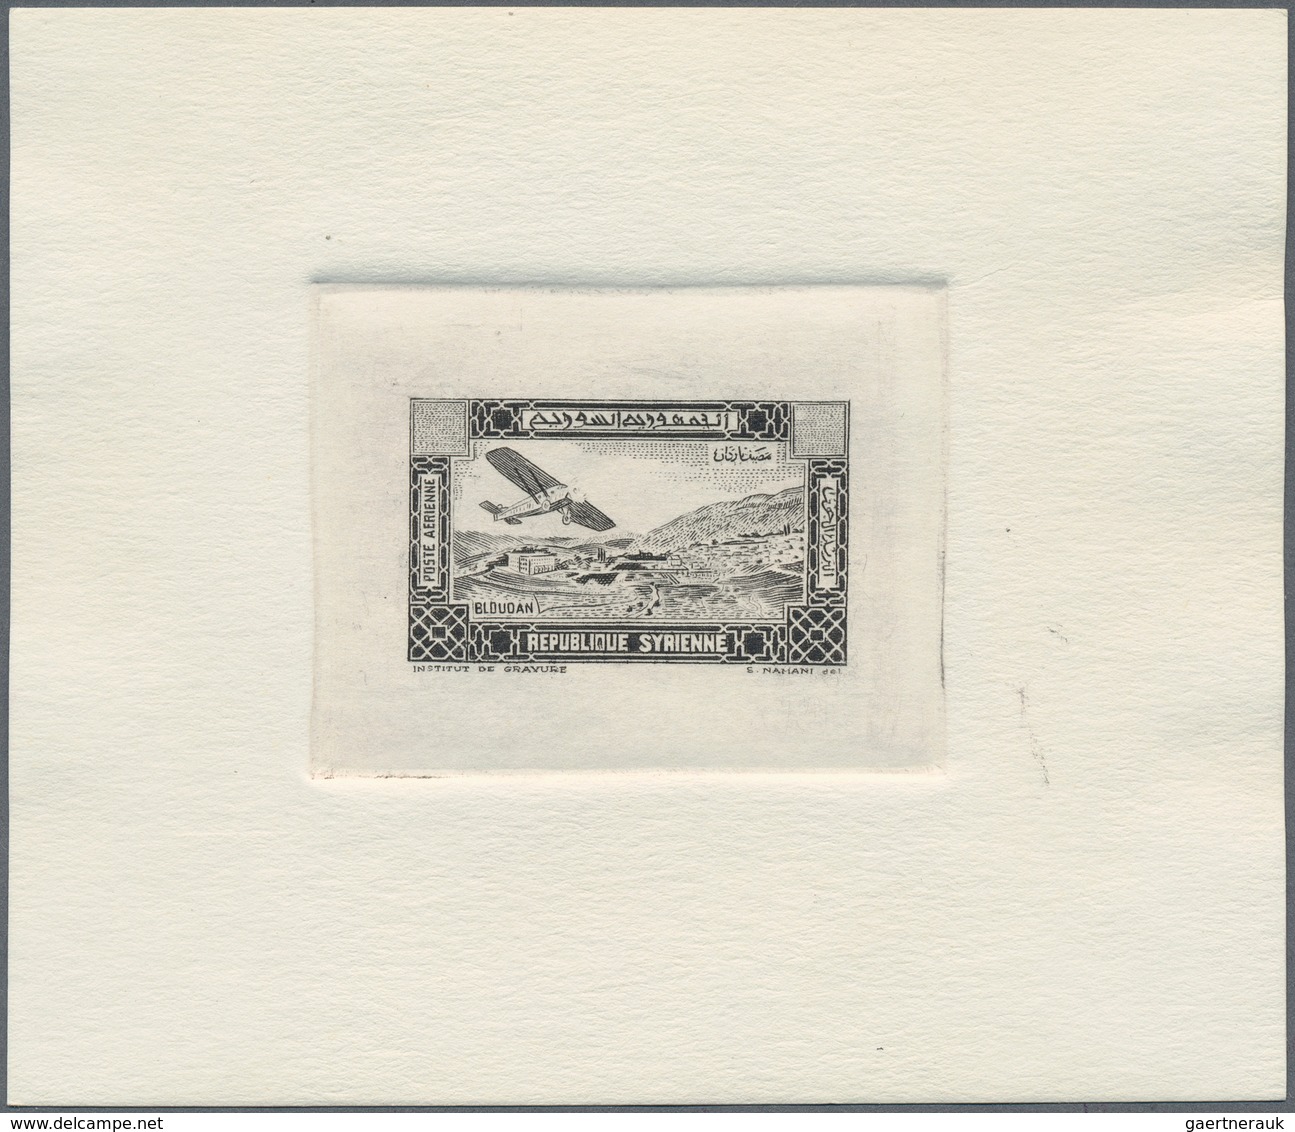 Syrien: 1934, 10 Years Republic Air Mail Issue Three Sunk Die Proofs Without Value On Thick Paper, C - Syrien